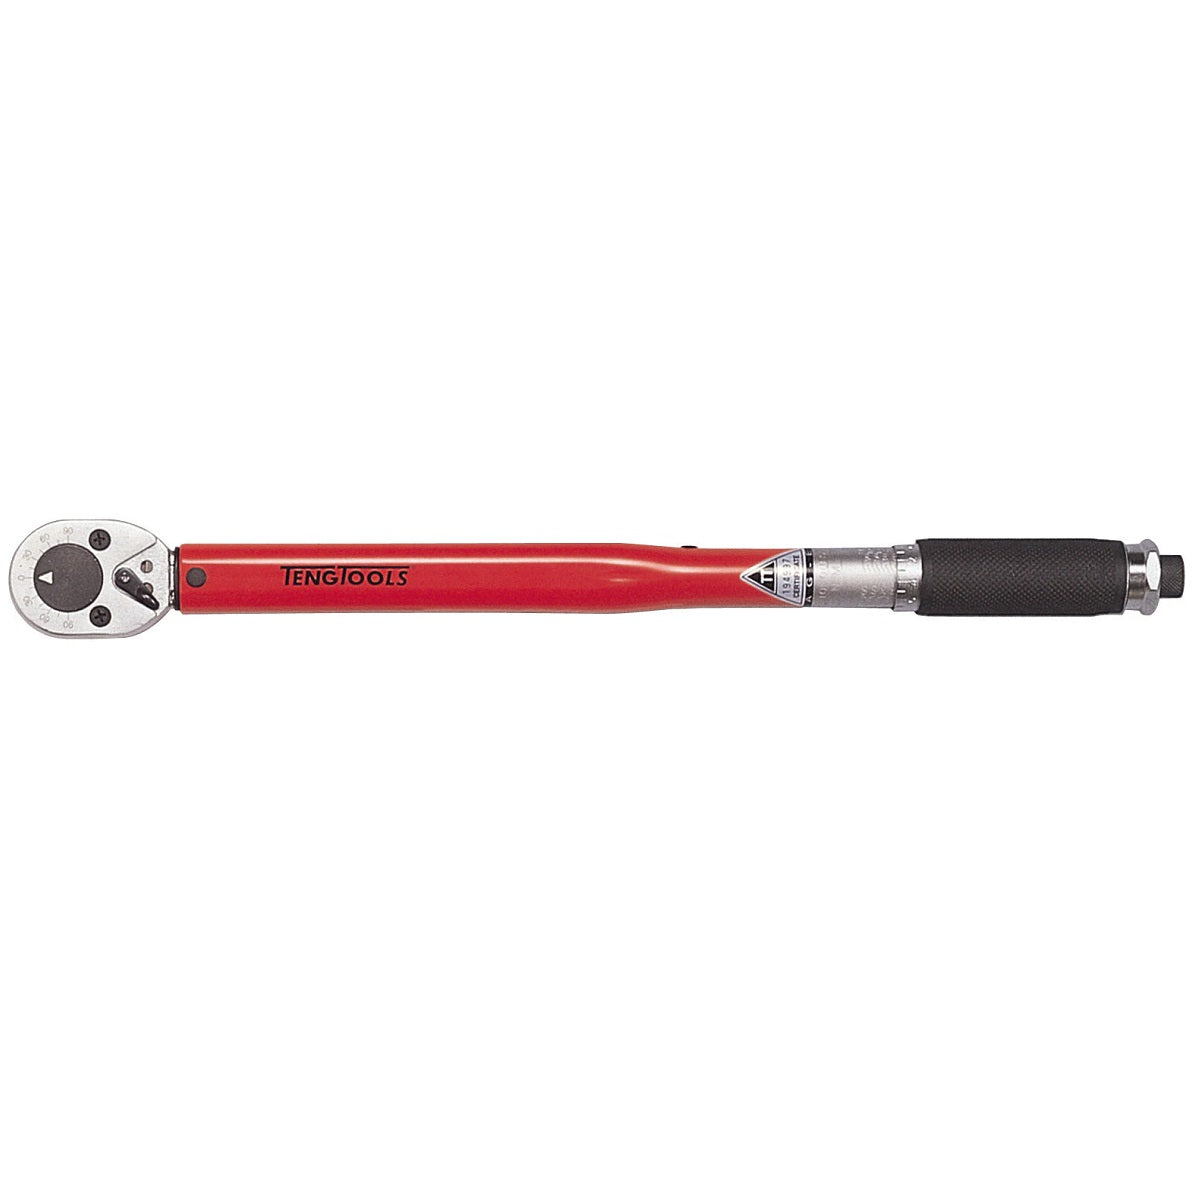 Teng Tools 1292AG-EP Torque Wrench 1/2" Drive 40-200Nm